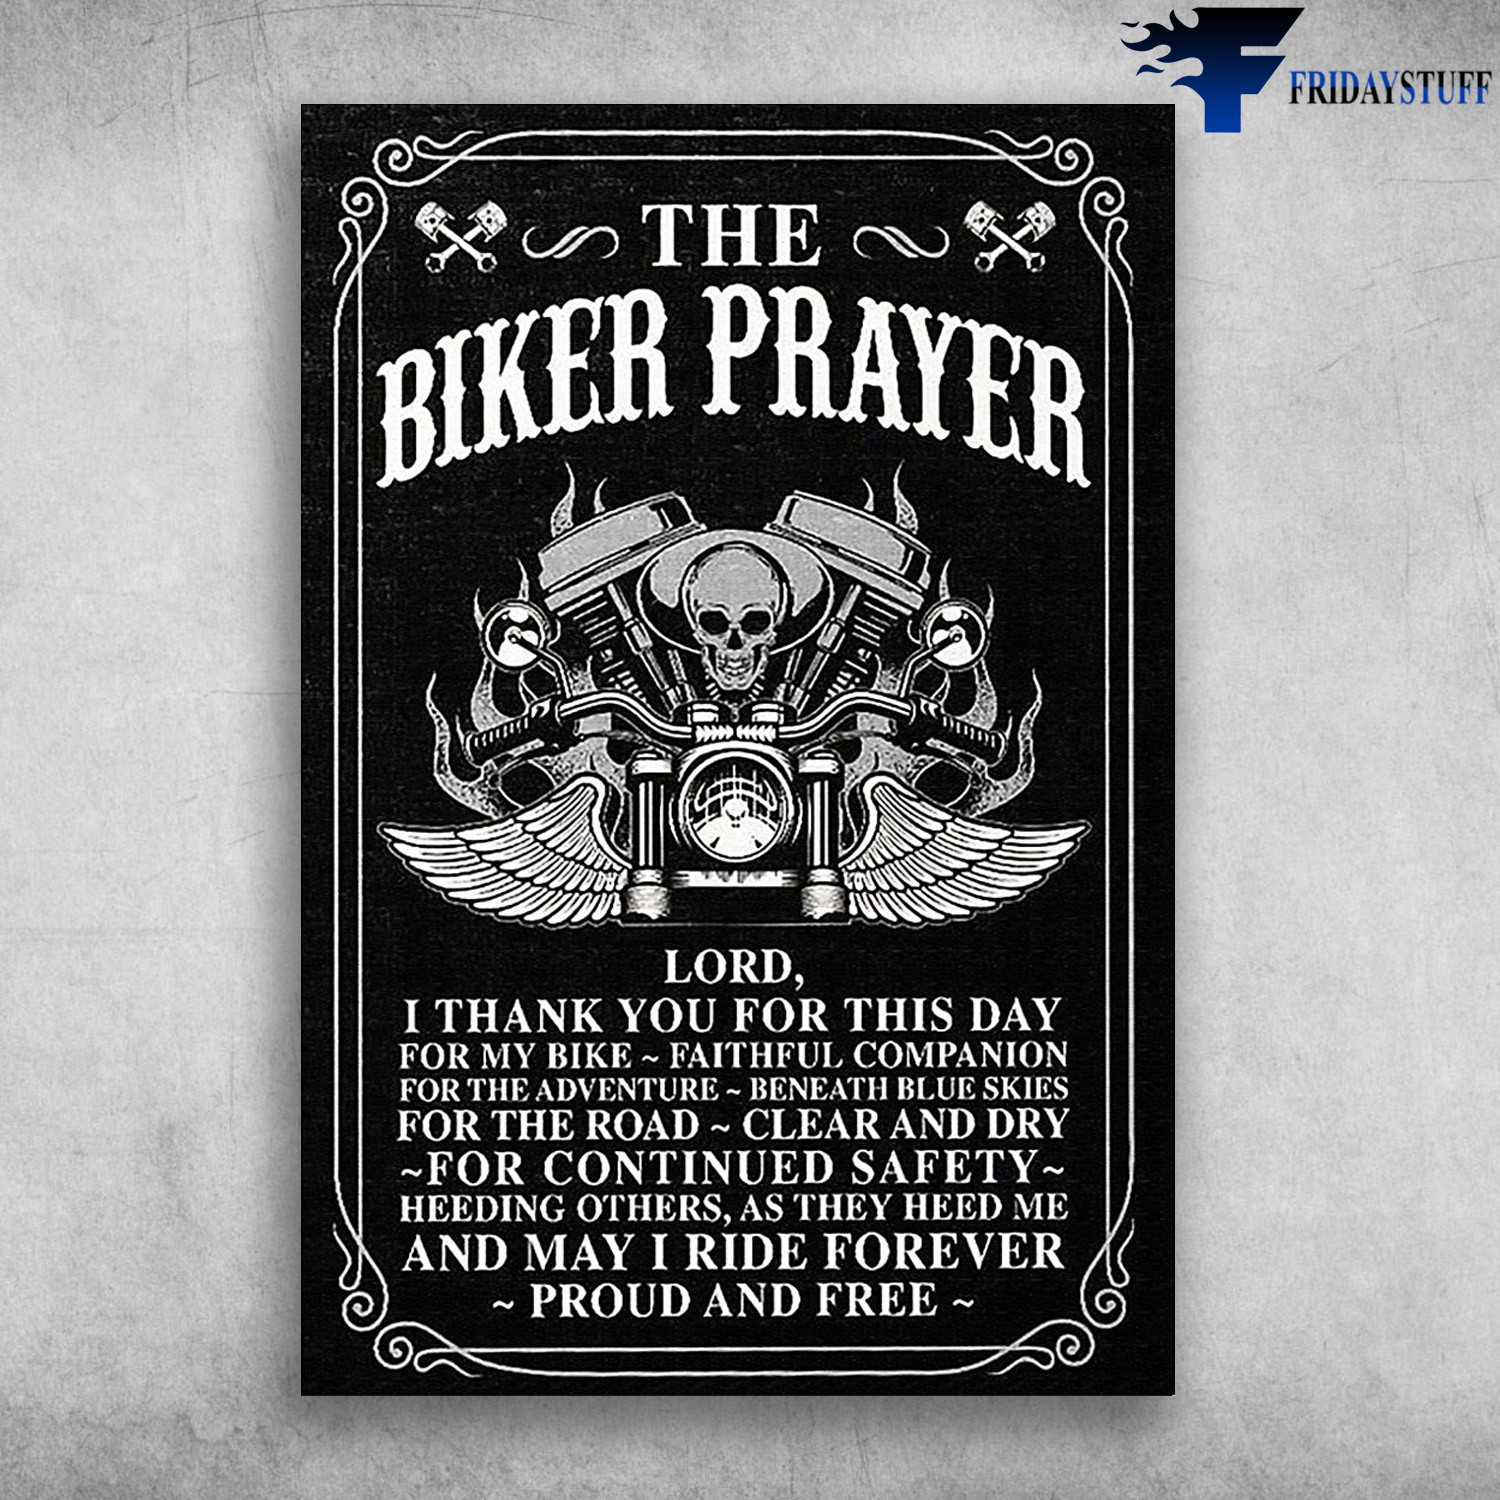 The Biker Prayer - Lord, I Thank You For This Day, For My Bike, Faithful, Companion For The Adventure, Beneath Blue Skies For The Road, Clear And Dry, For The Road, For Continued Safety